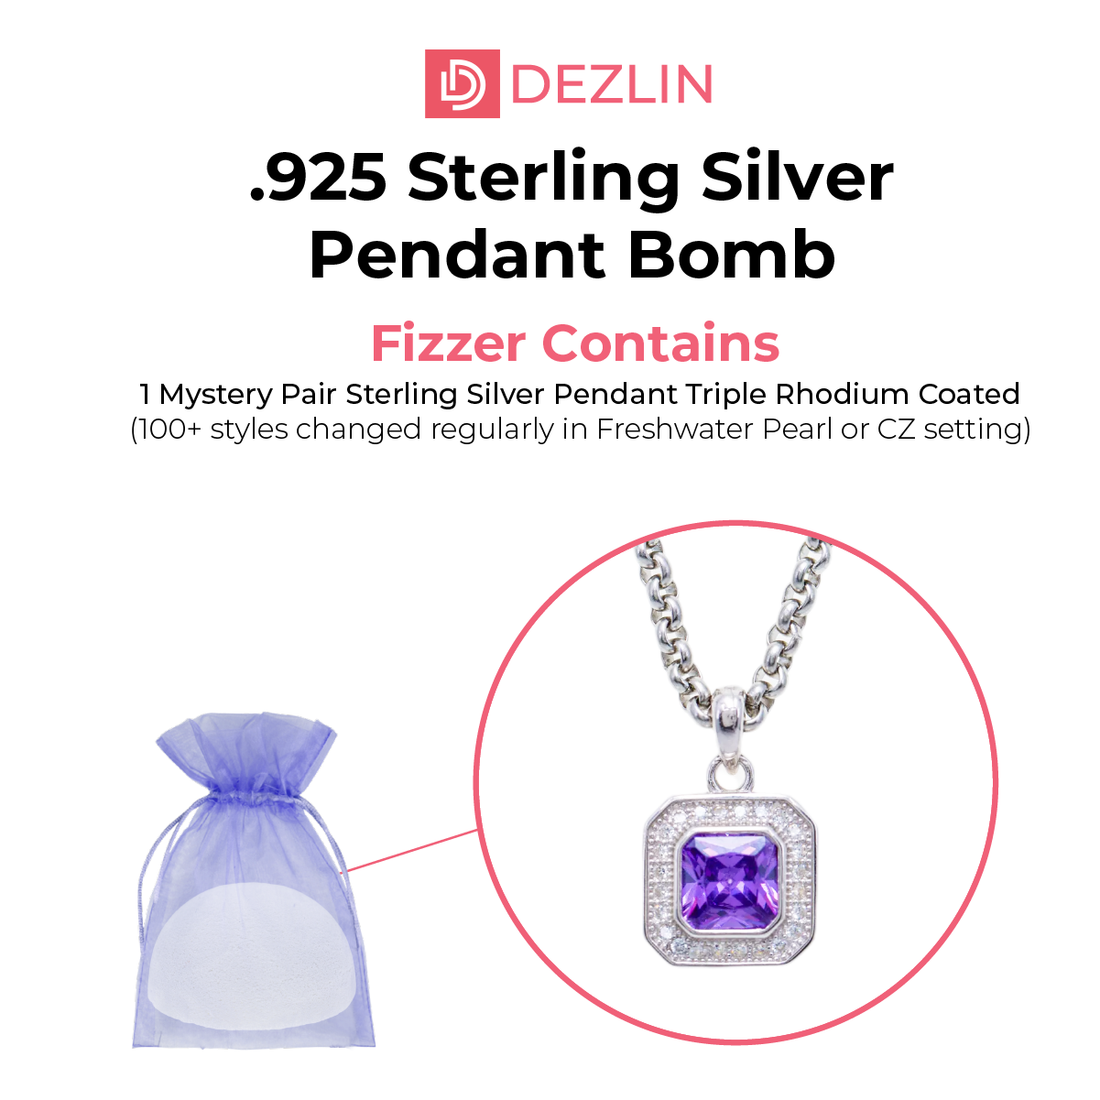 Pendant Bomb - 925 Sterling Silver Rhodium Coated (100+ styles)